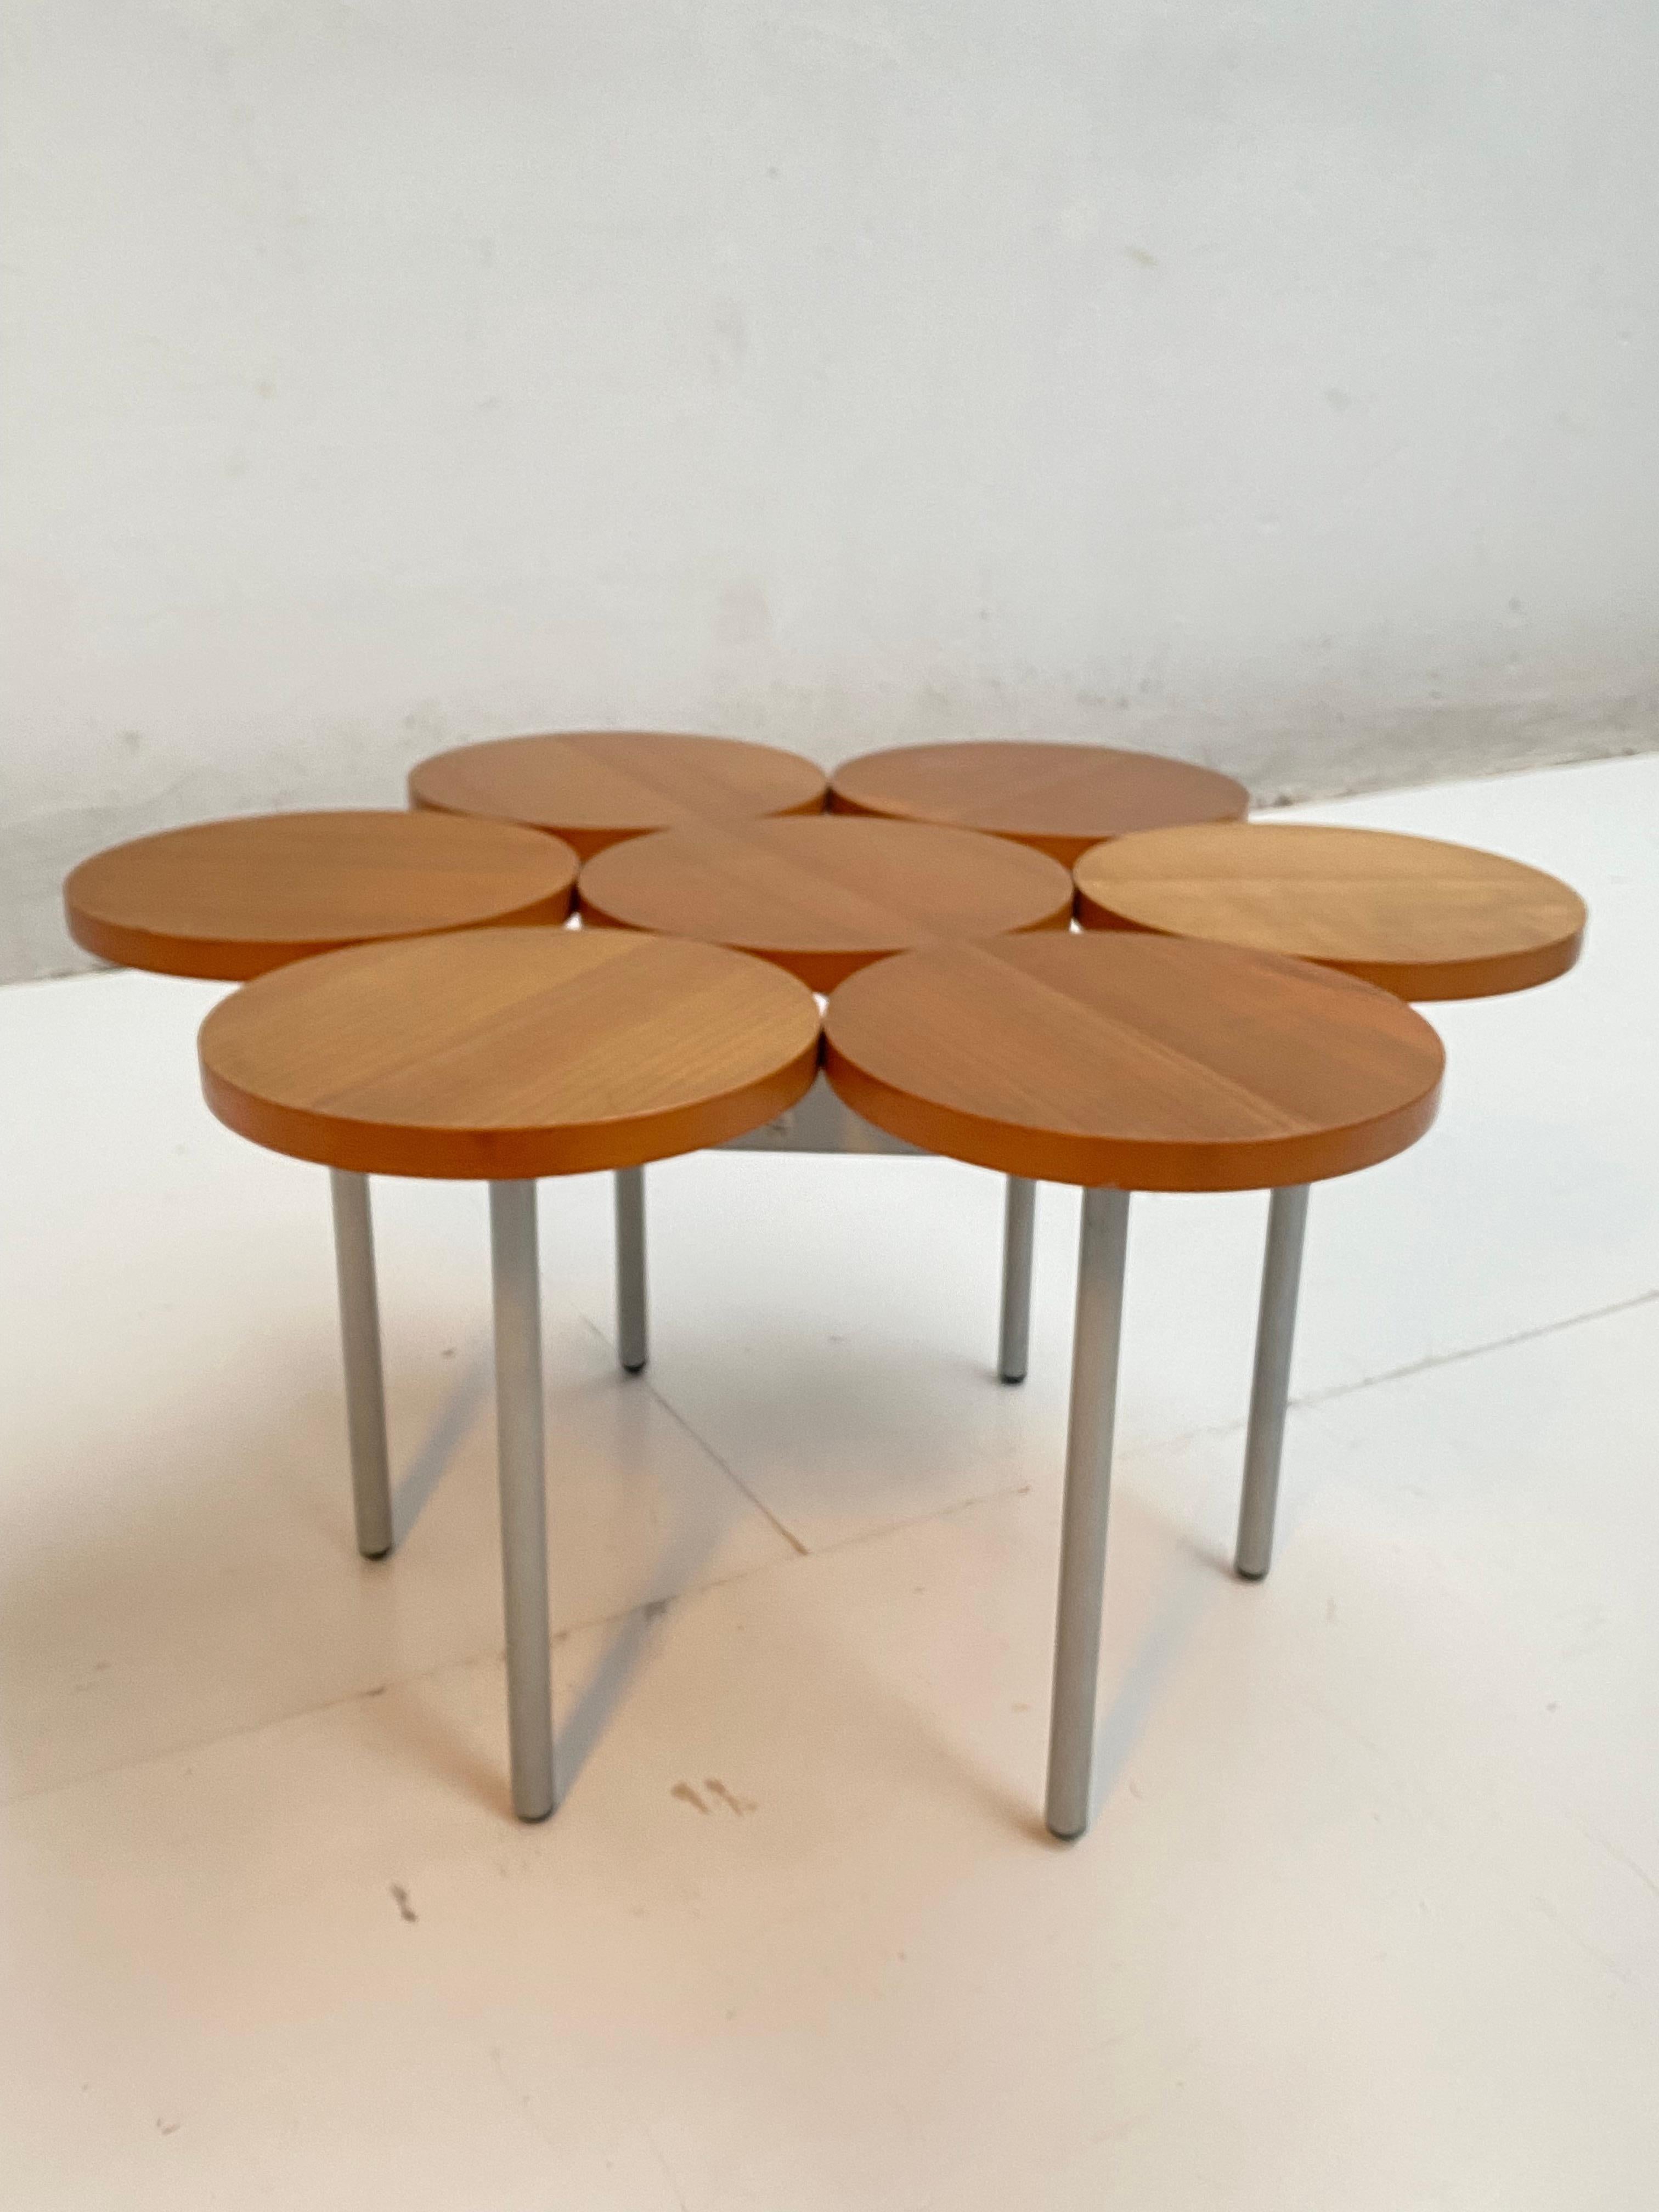 Post-Modern Contemporary Italian 'Flower' Shaped Side Table 'Progetti' Made in Italy 2000's  For Sale